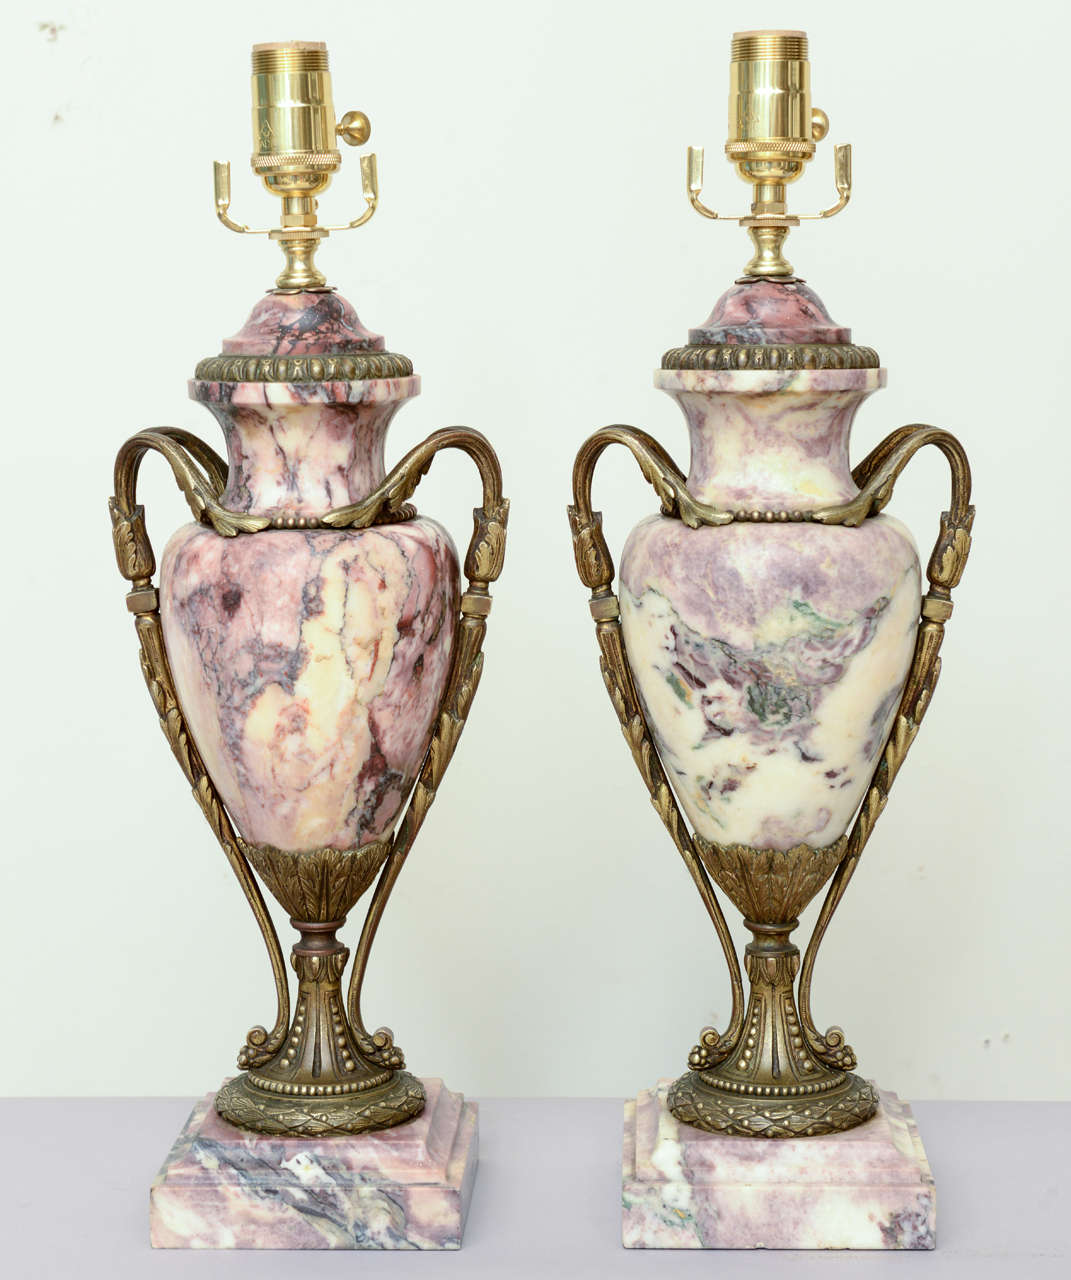 Fine pair of Louis XV rouge marble lamped urns, with bronze mounts; compana form with double foliate scrolling handles, both with waisted socle decorated with laureling, on square plinth.

Stock ID: D6613